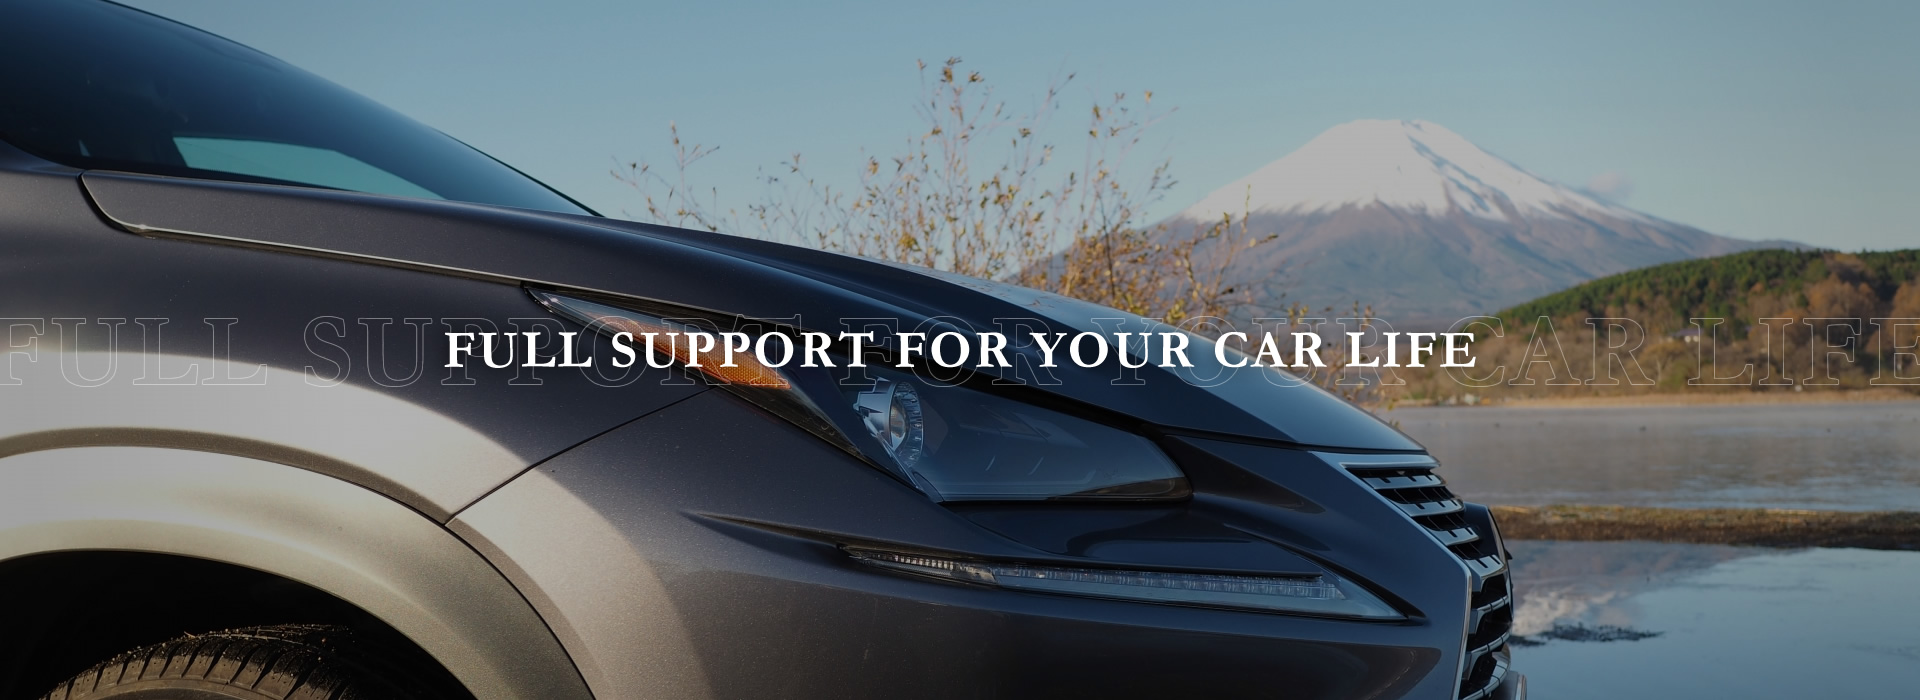 FULL SUPPORT FOR YOUR CAR LIFE